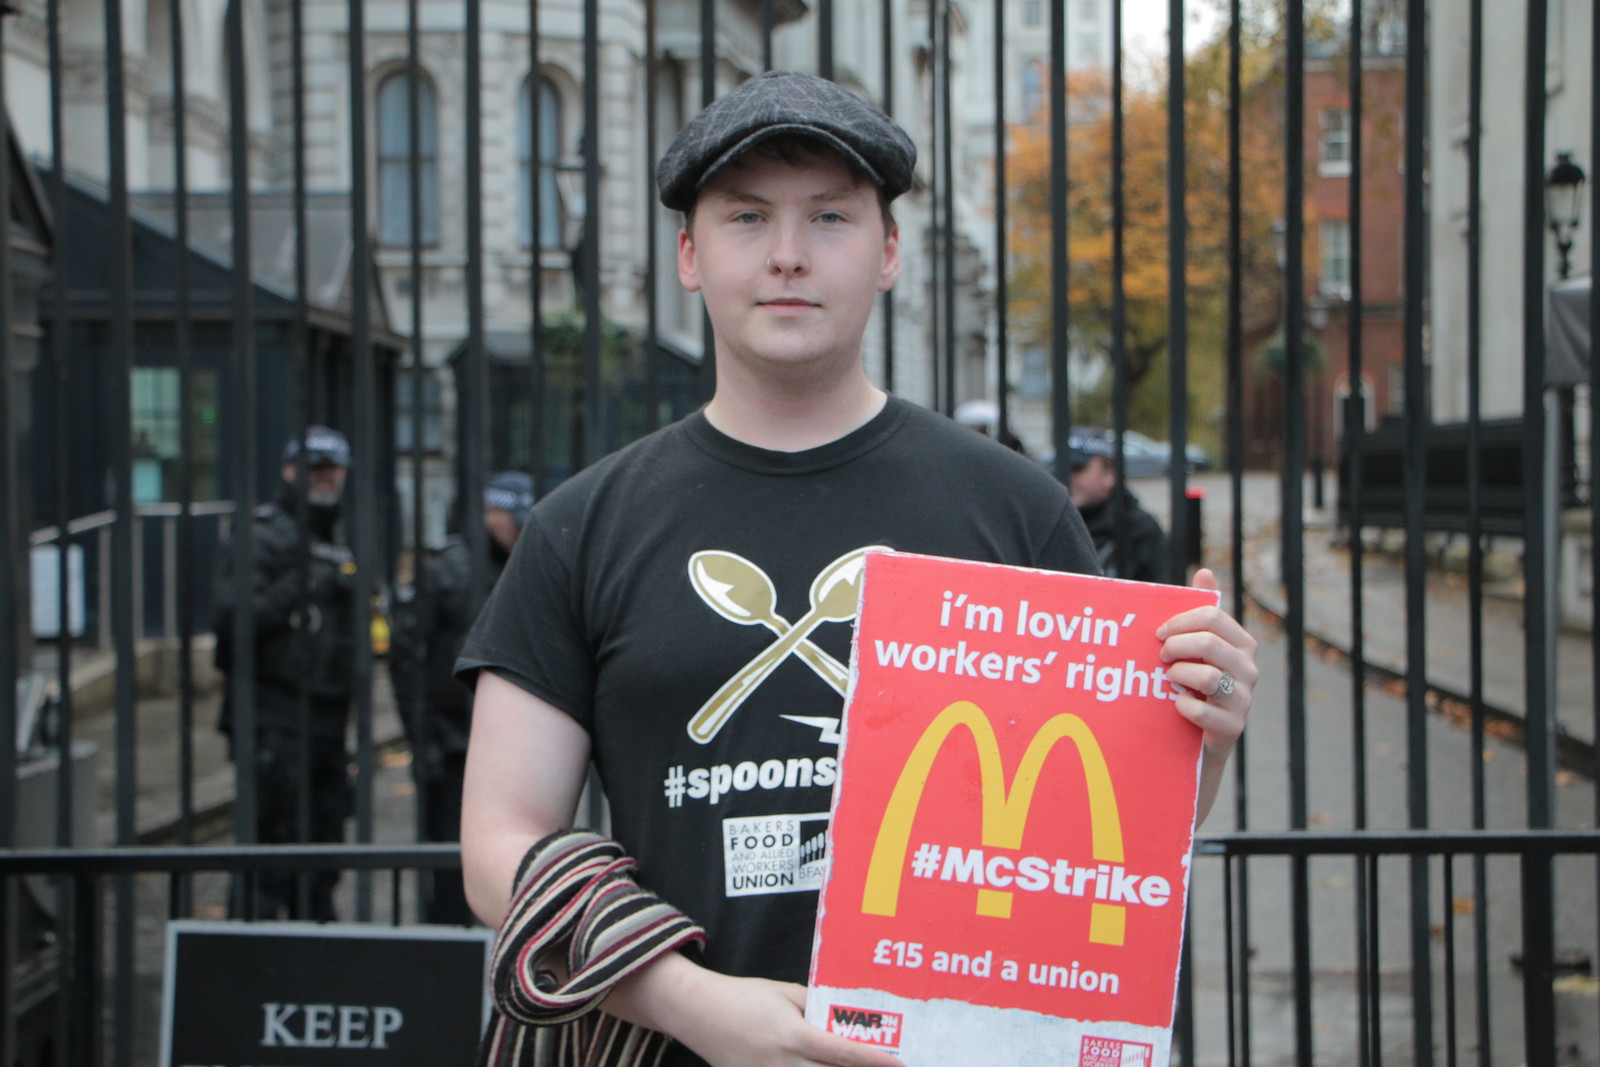 McStrike: The fight for £15